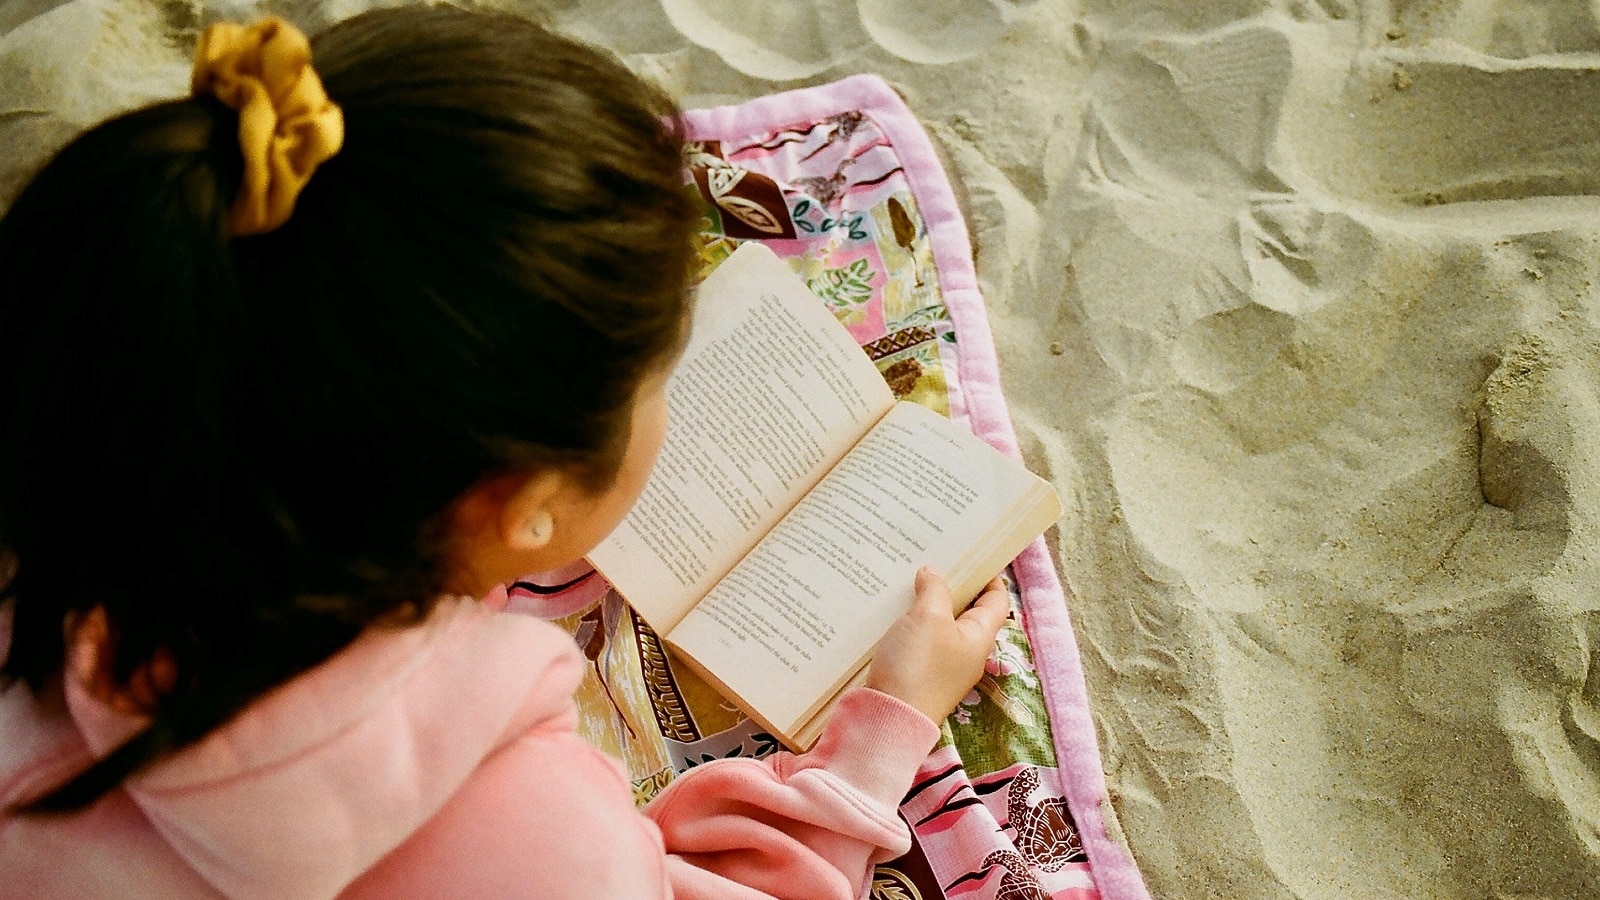 Girl reading a book in the sand